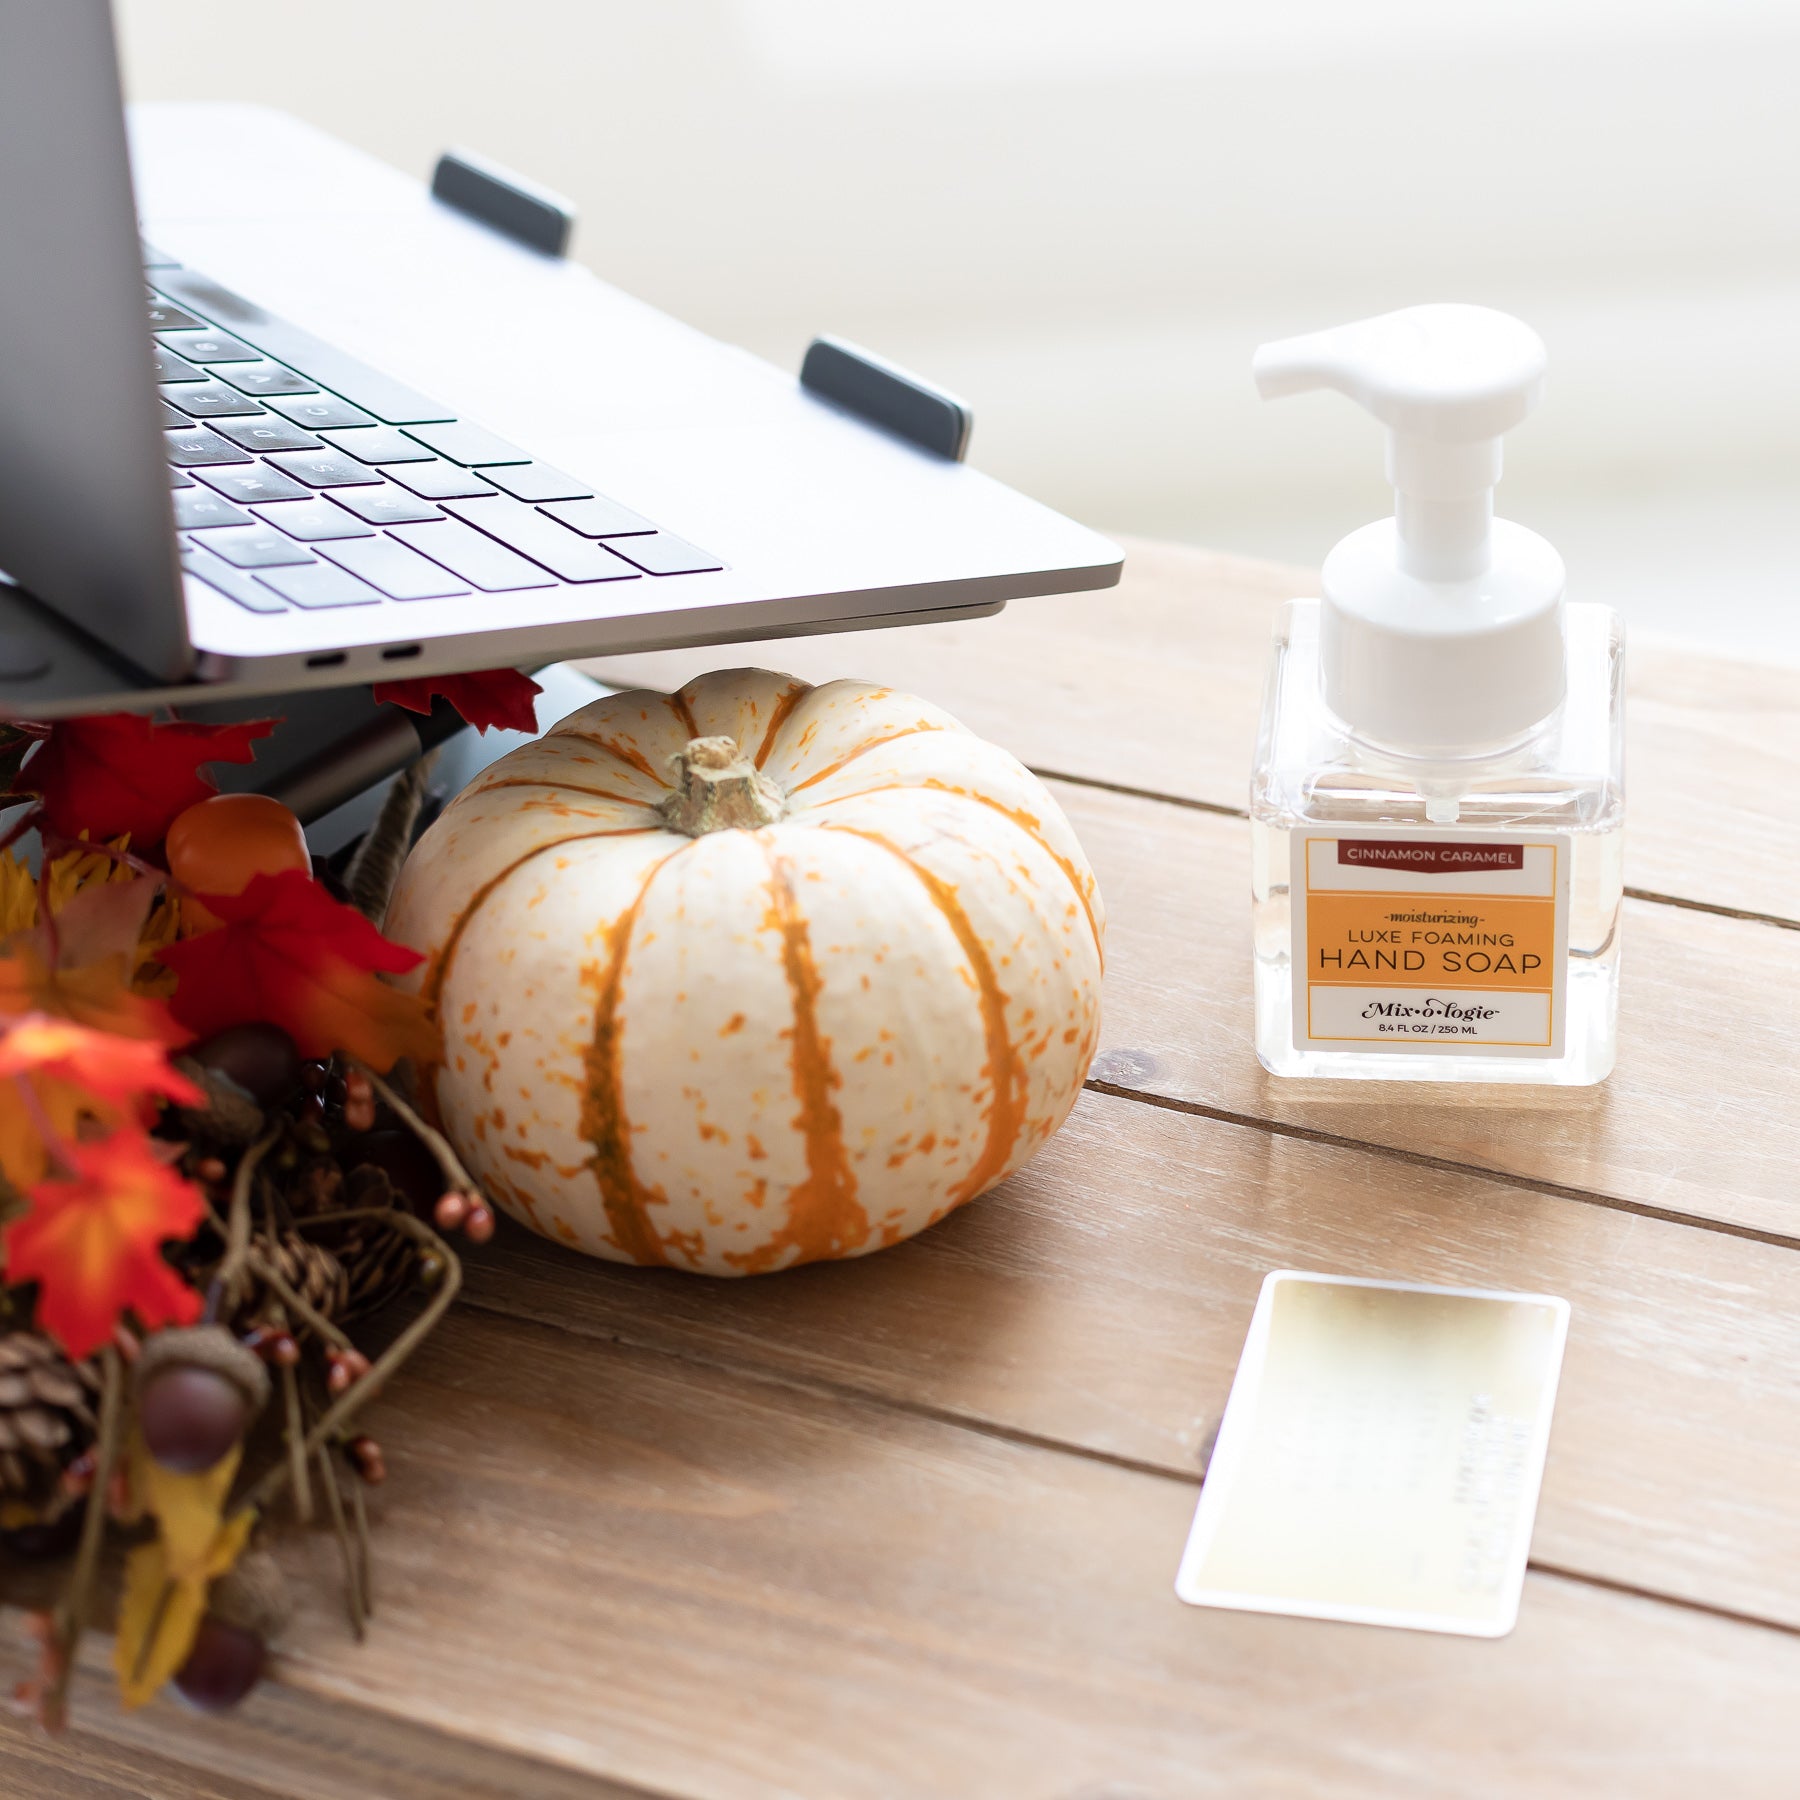 Moisturizing Luxe Foaming Hand Soap in Mixologie’s Cinnamon Carmel scent. Clear glass square shaped container with white pump that contains 8.4 fl oz or 250 ML of clear liquid. Pictured with fall leaves and pumpkin on table.